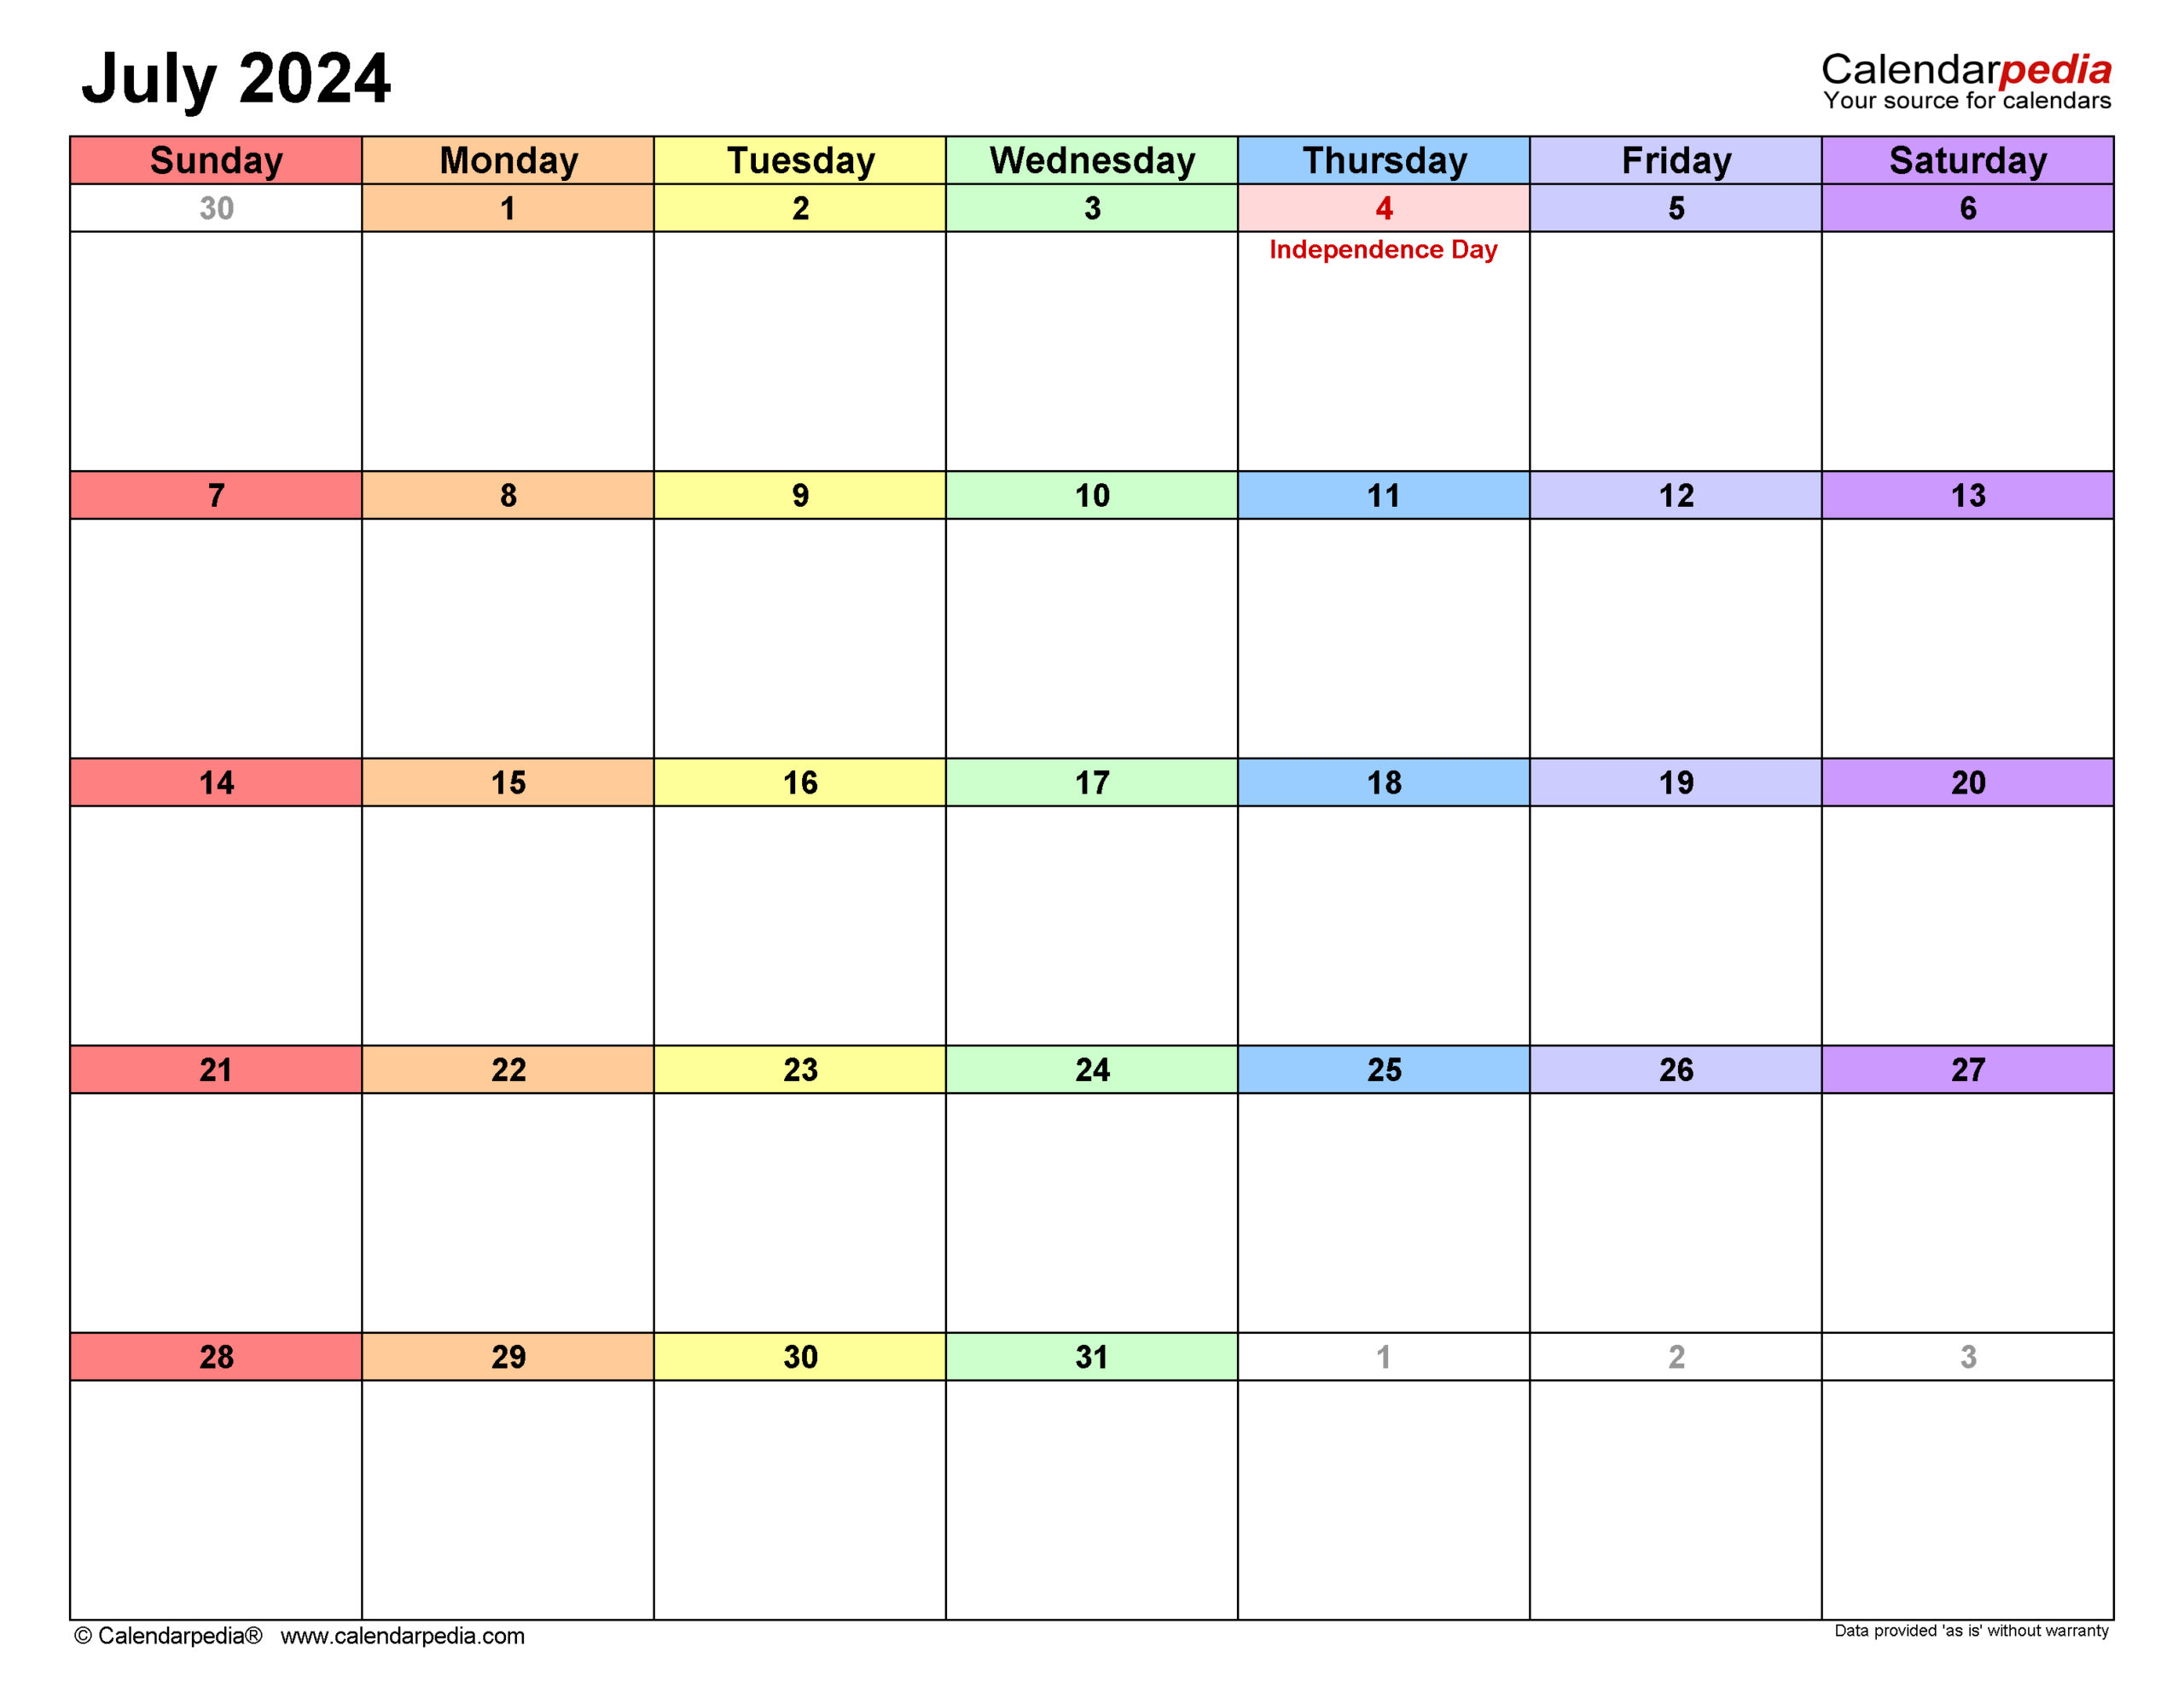 July 2024 Calendar | Templates For Word, Excel And Pdf inside Editable July 2024 Calendar Template